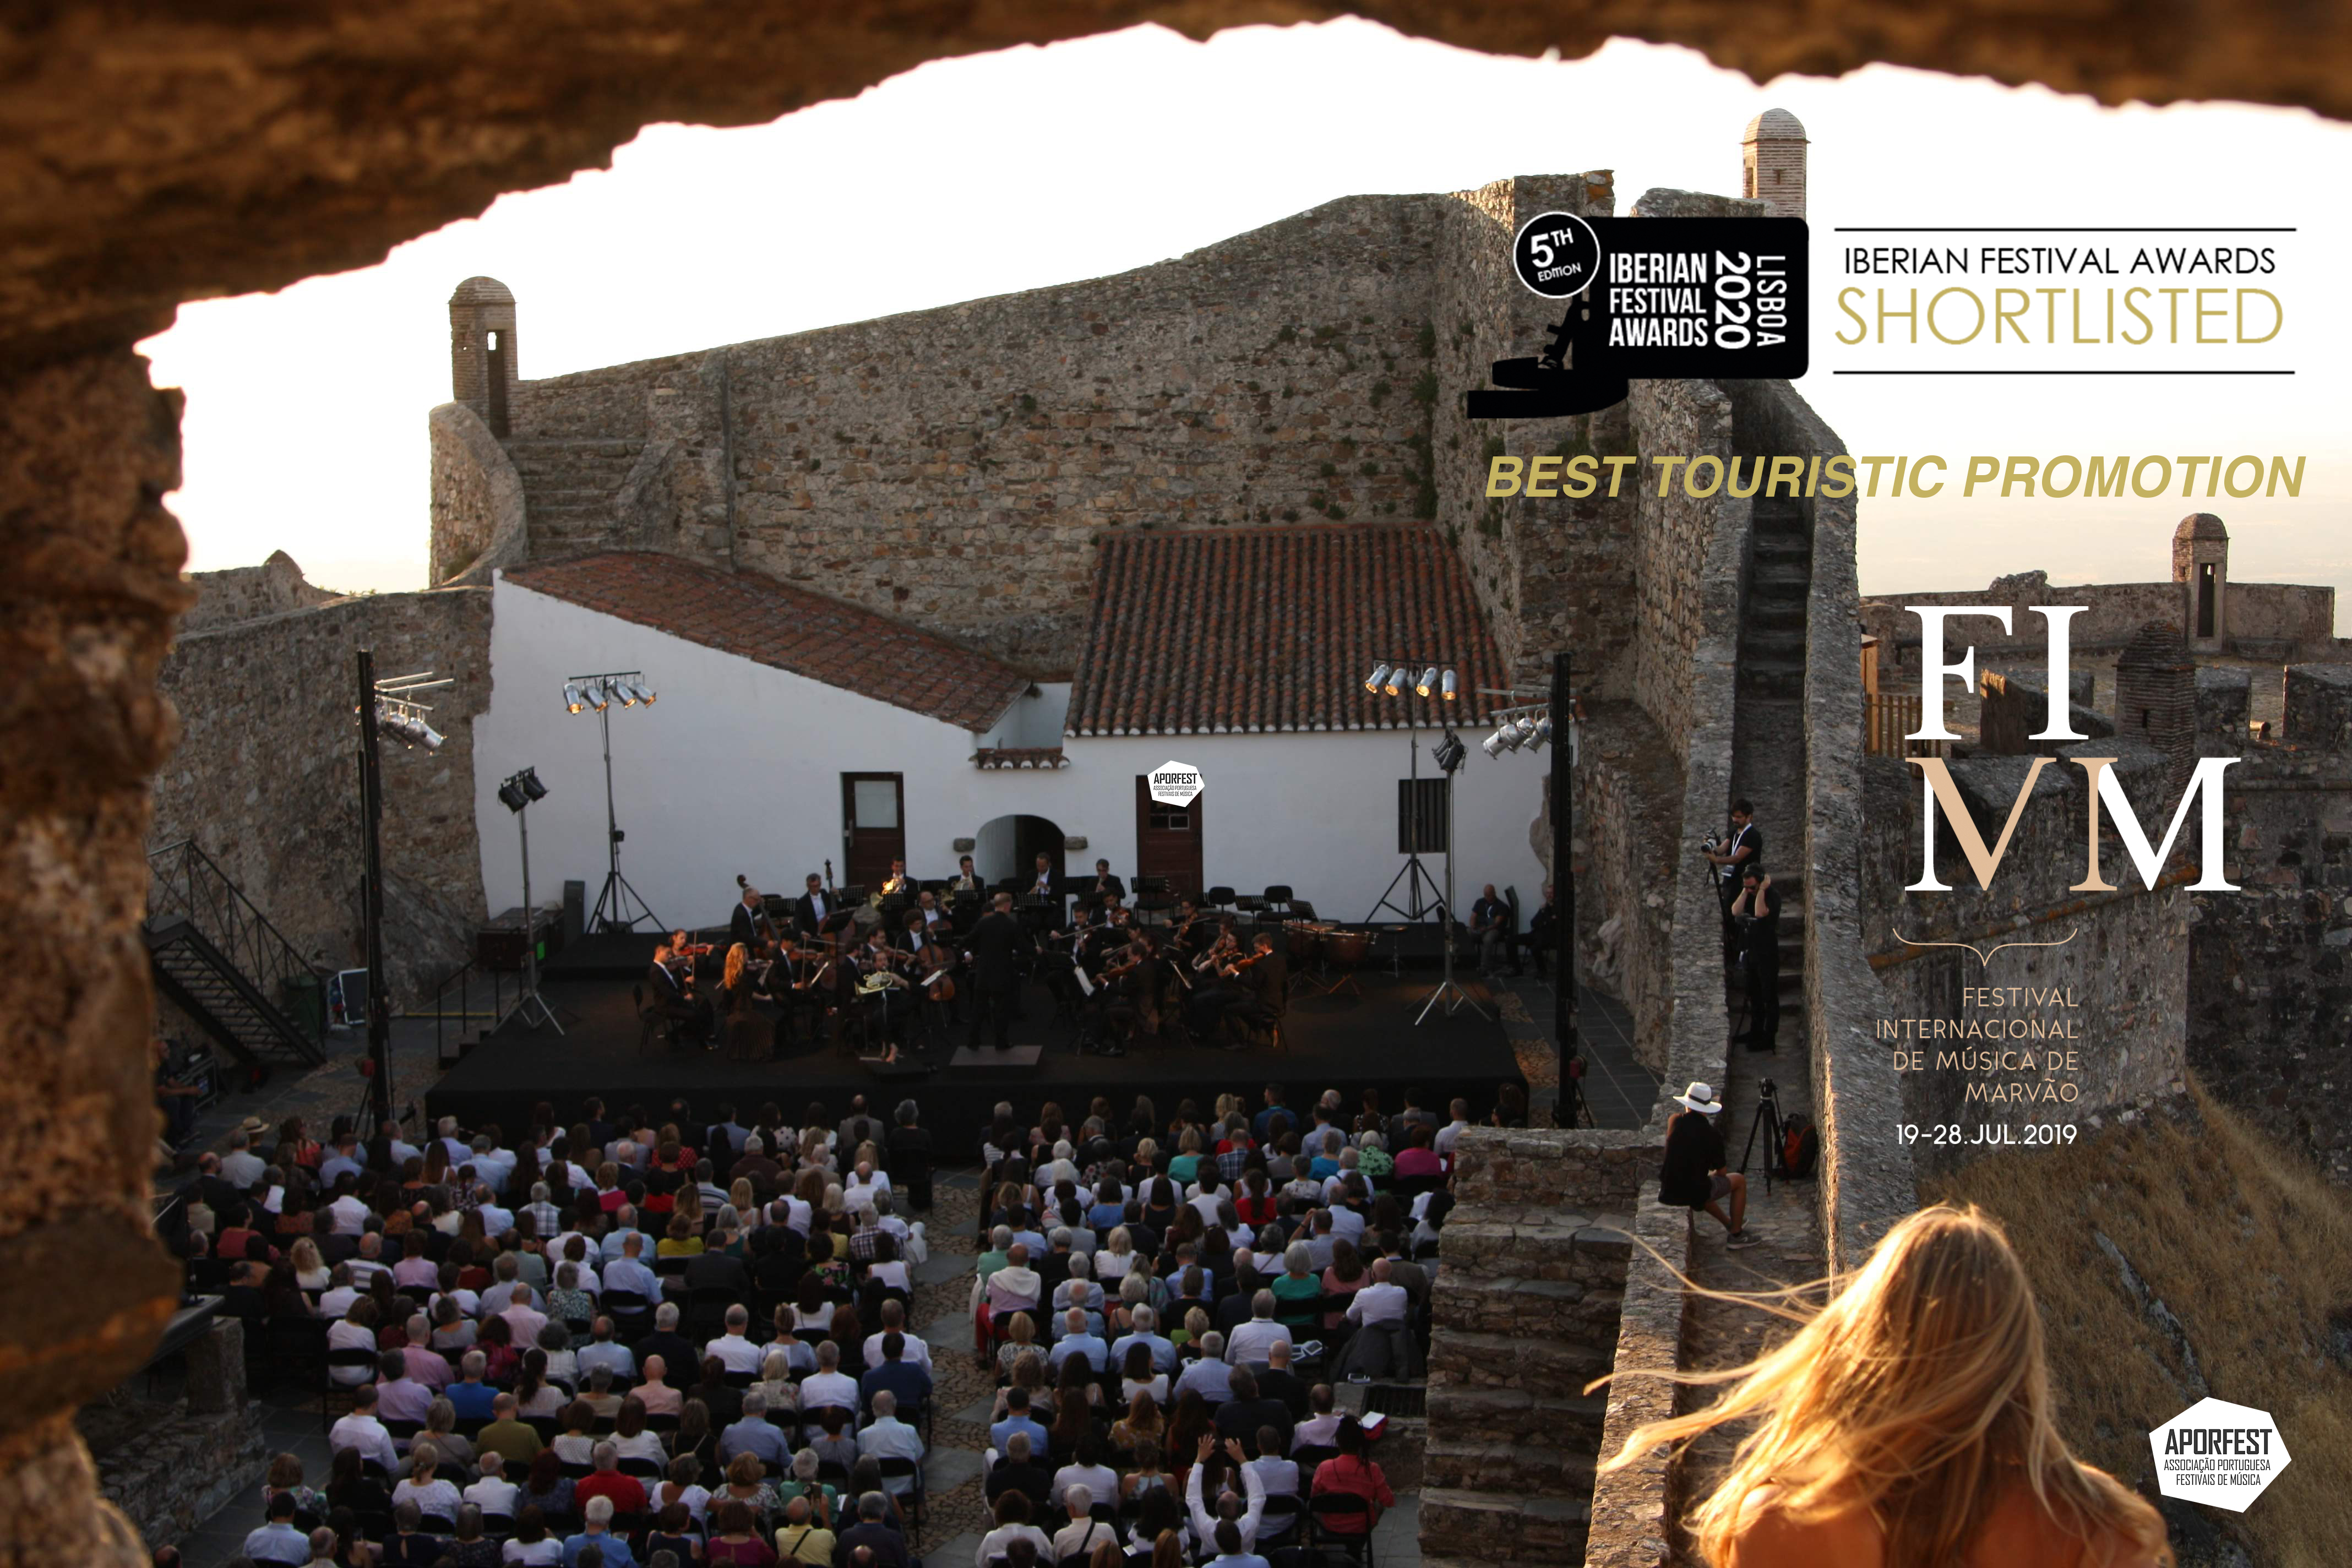 6th Marvão Festival (2019) shortlisted as “Best Touristic Promotion”